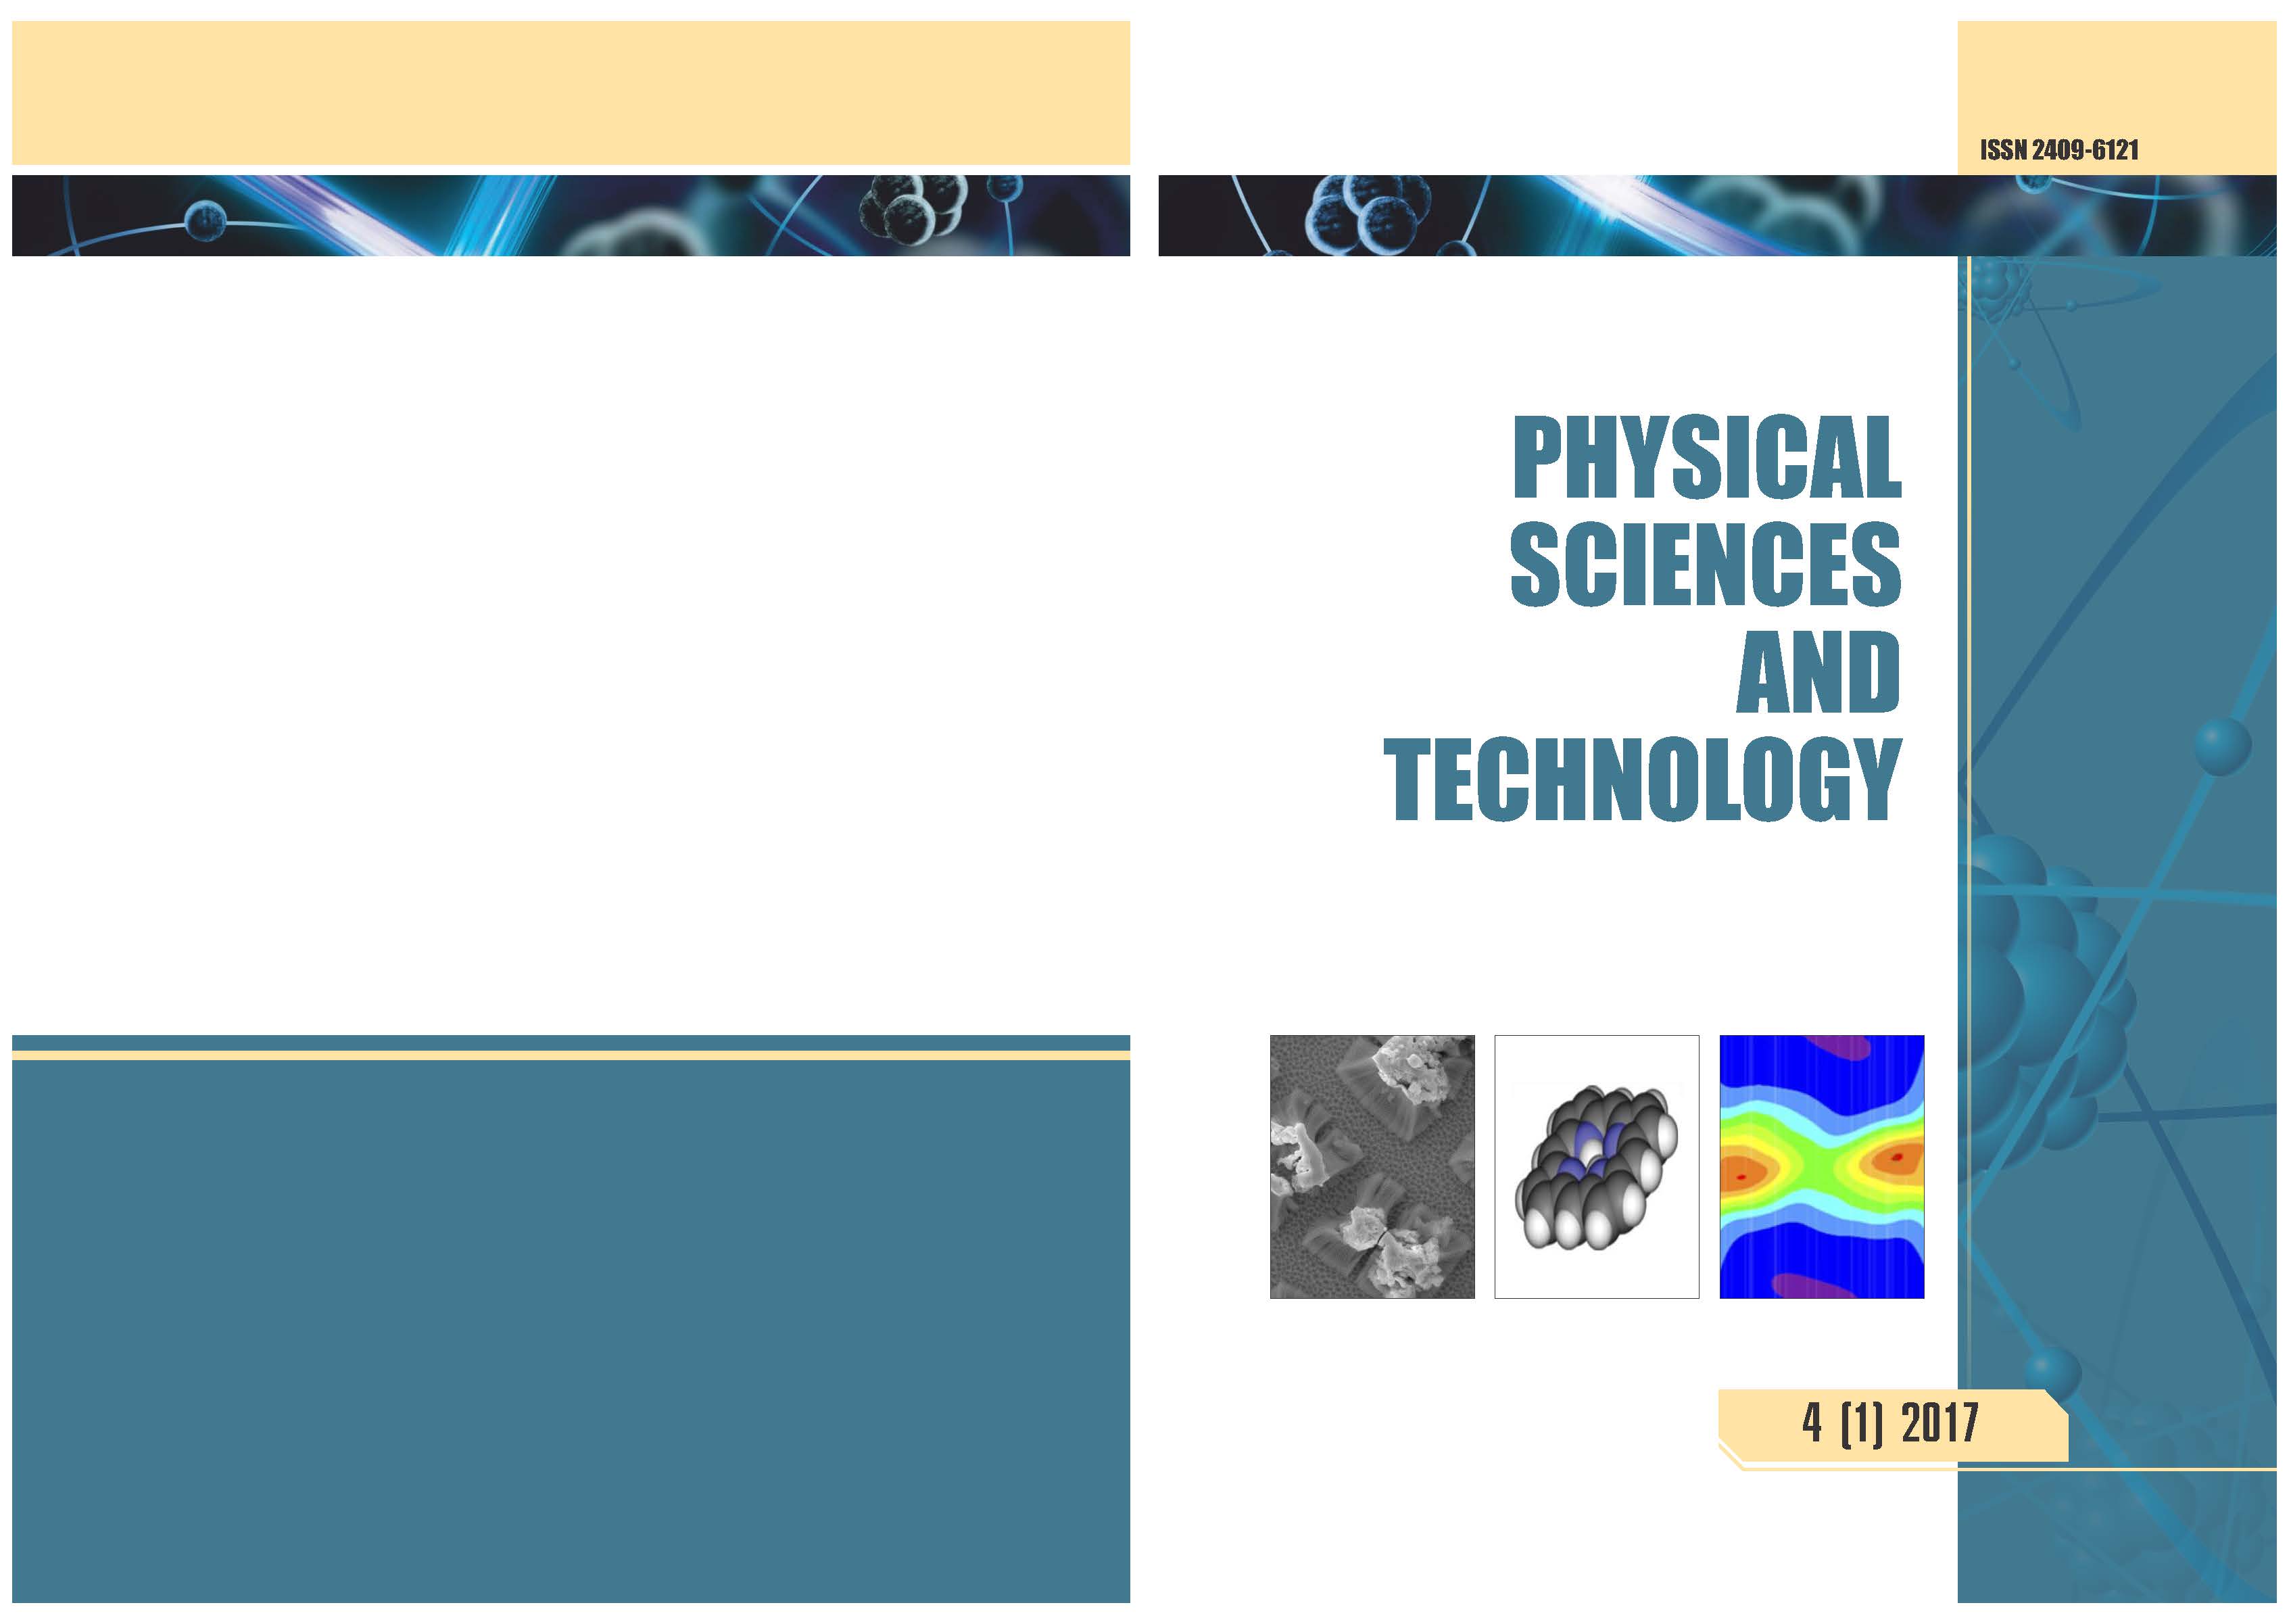 					View Vol. 4 No. 1 (2017): PHYSICAL SCIENCES AND TECHNOLOGY
				